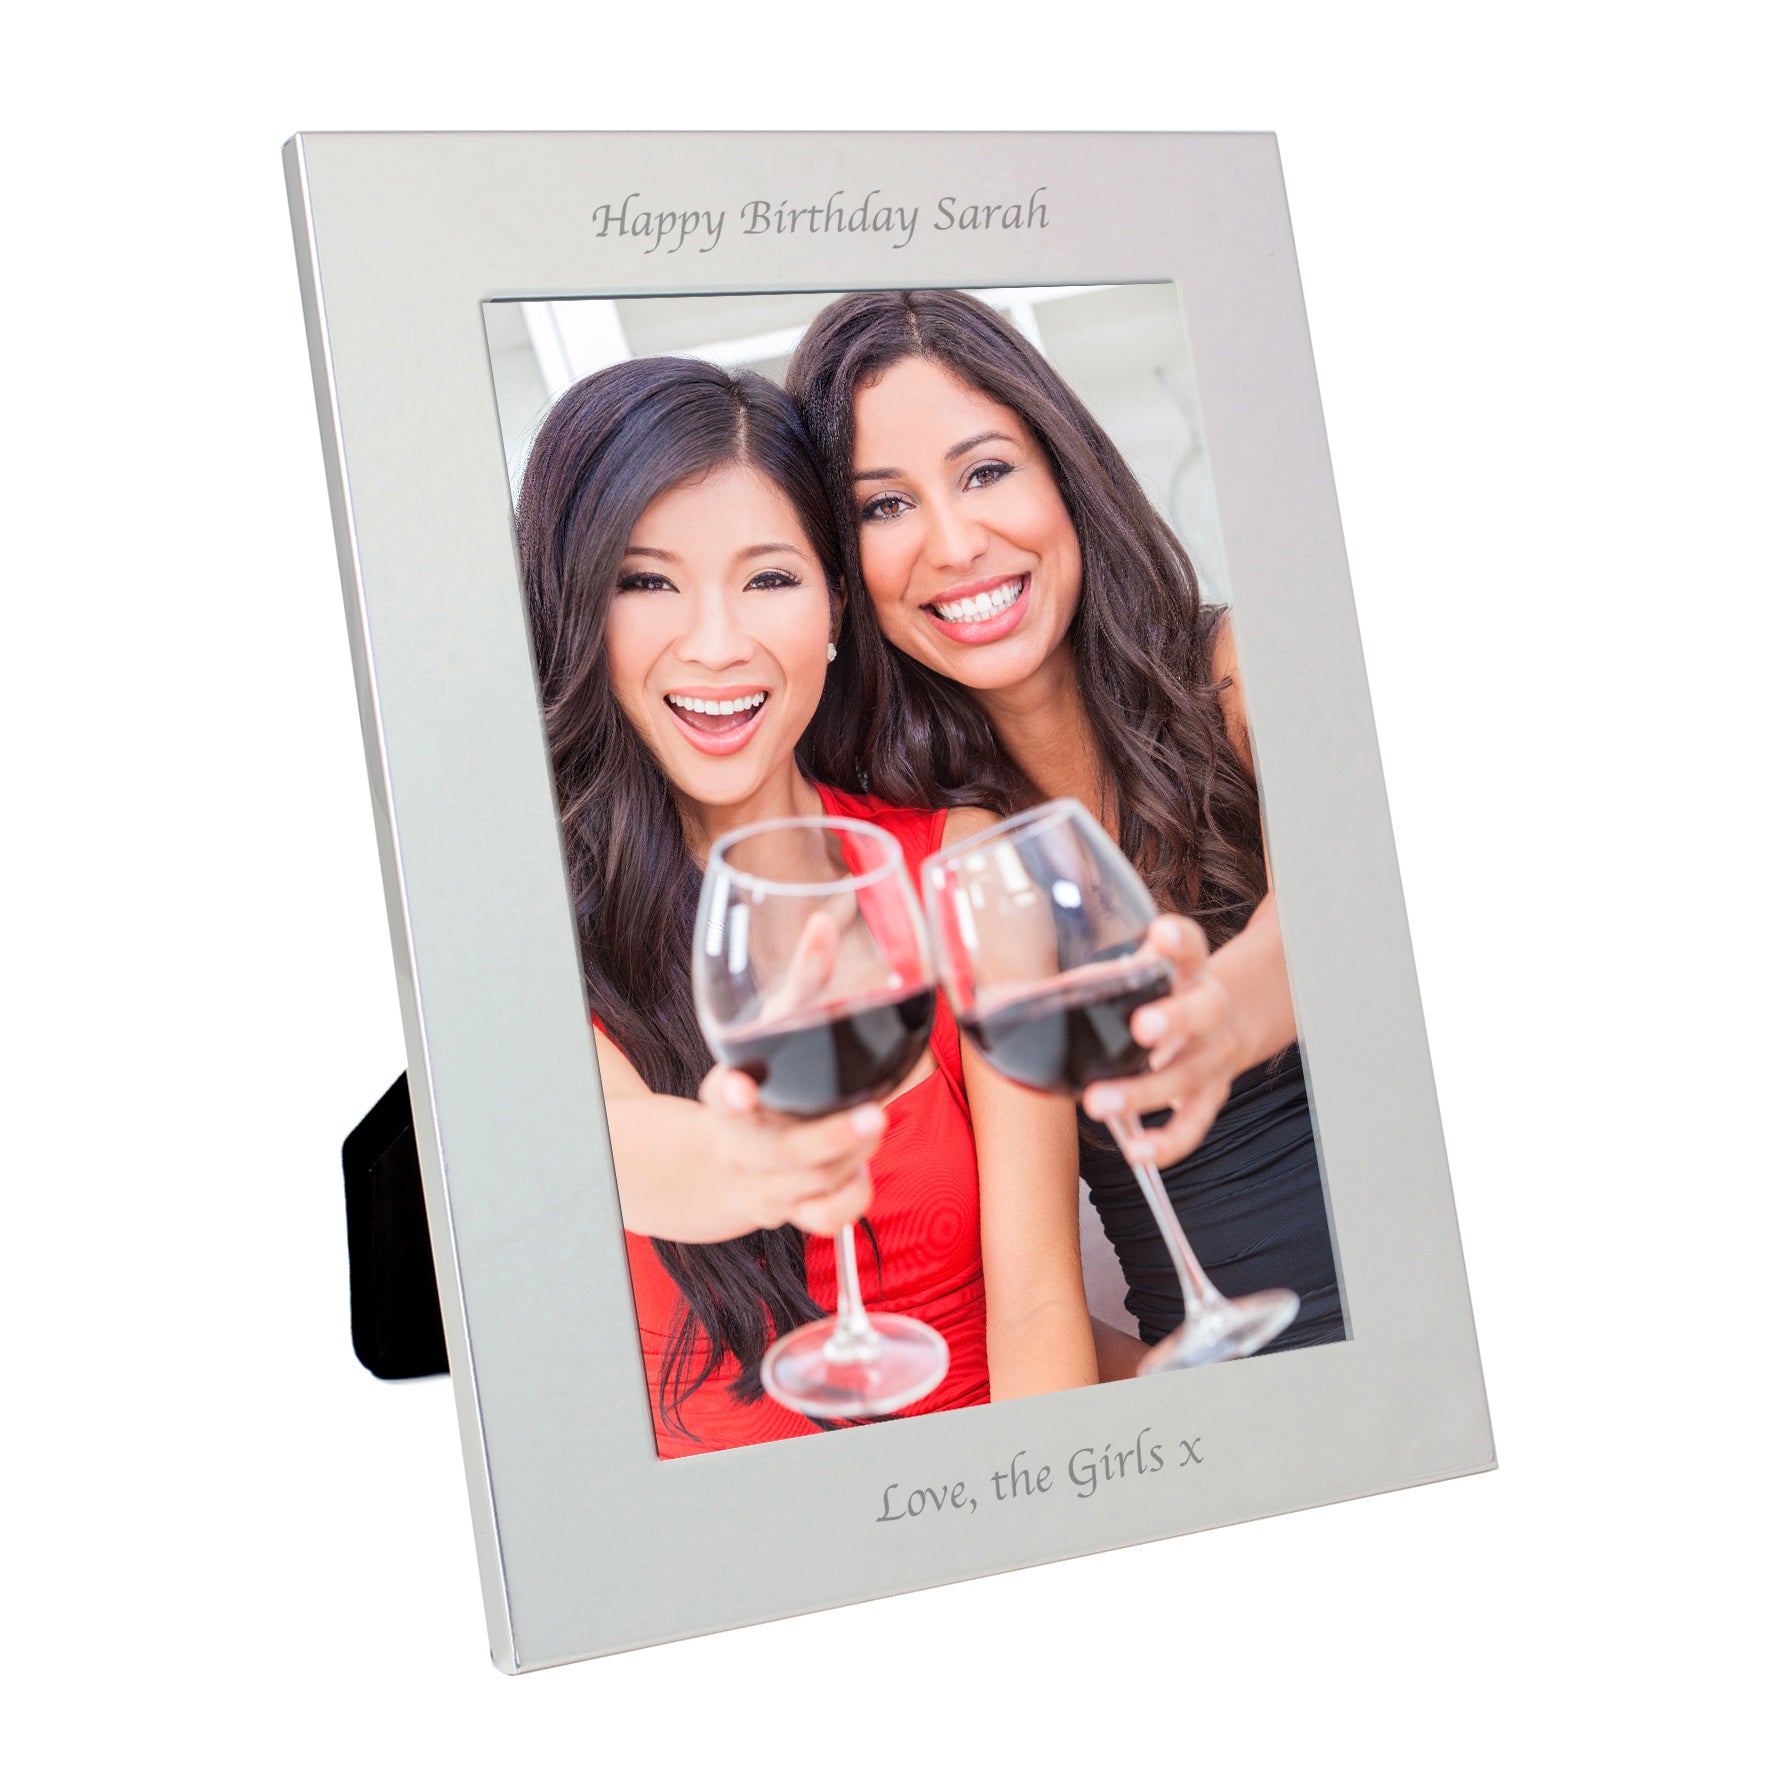 Personalised Silver 5x7 Photo Frame